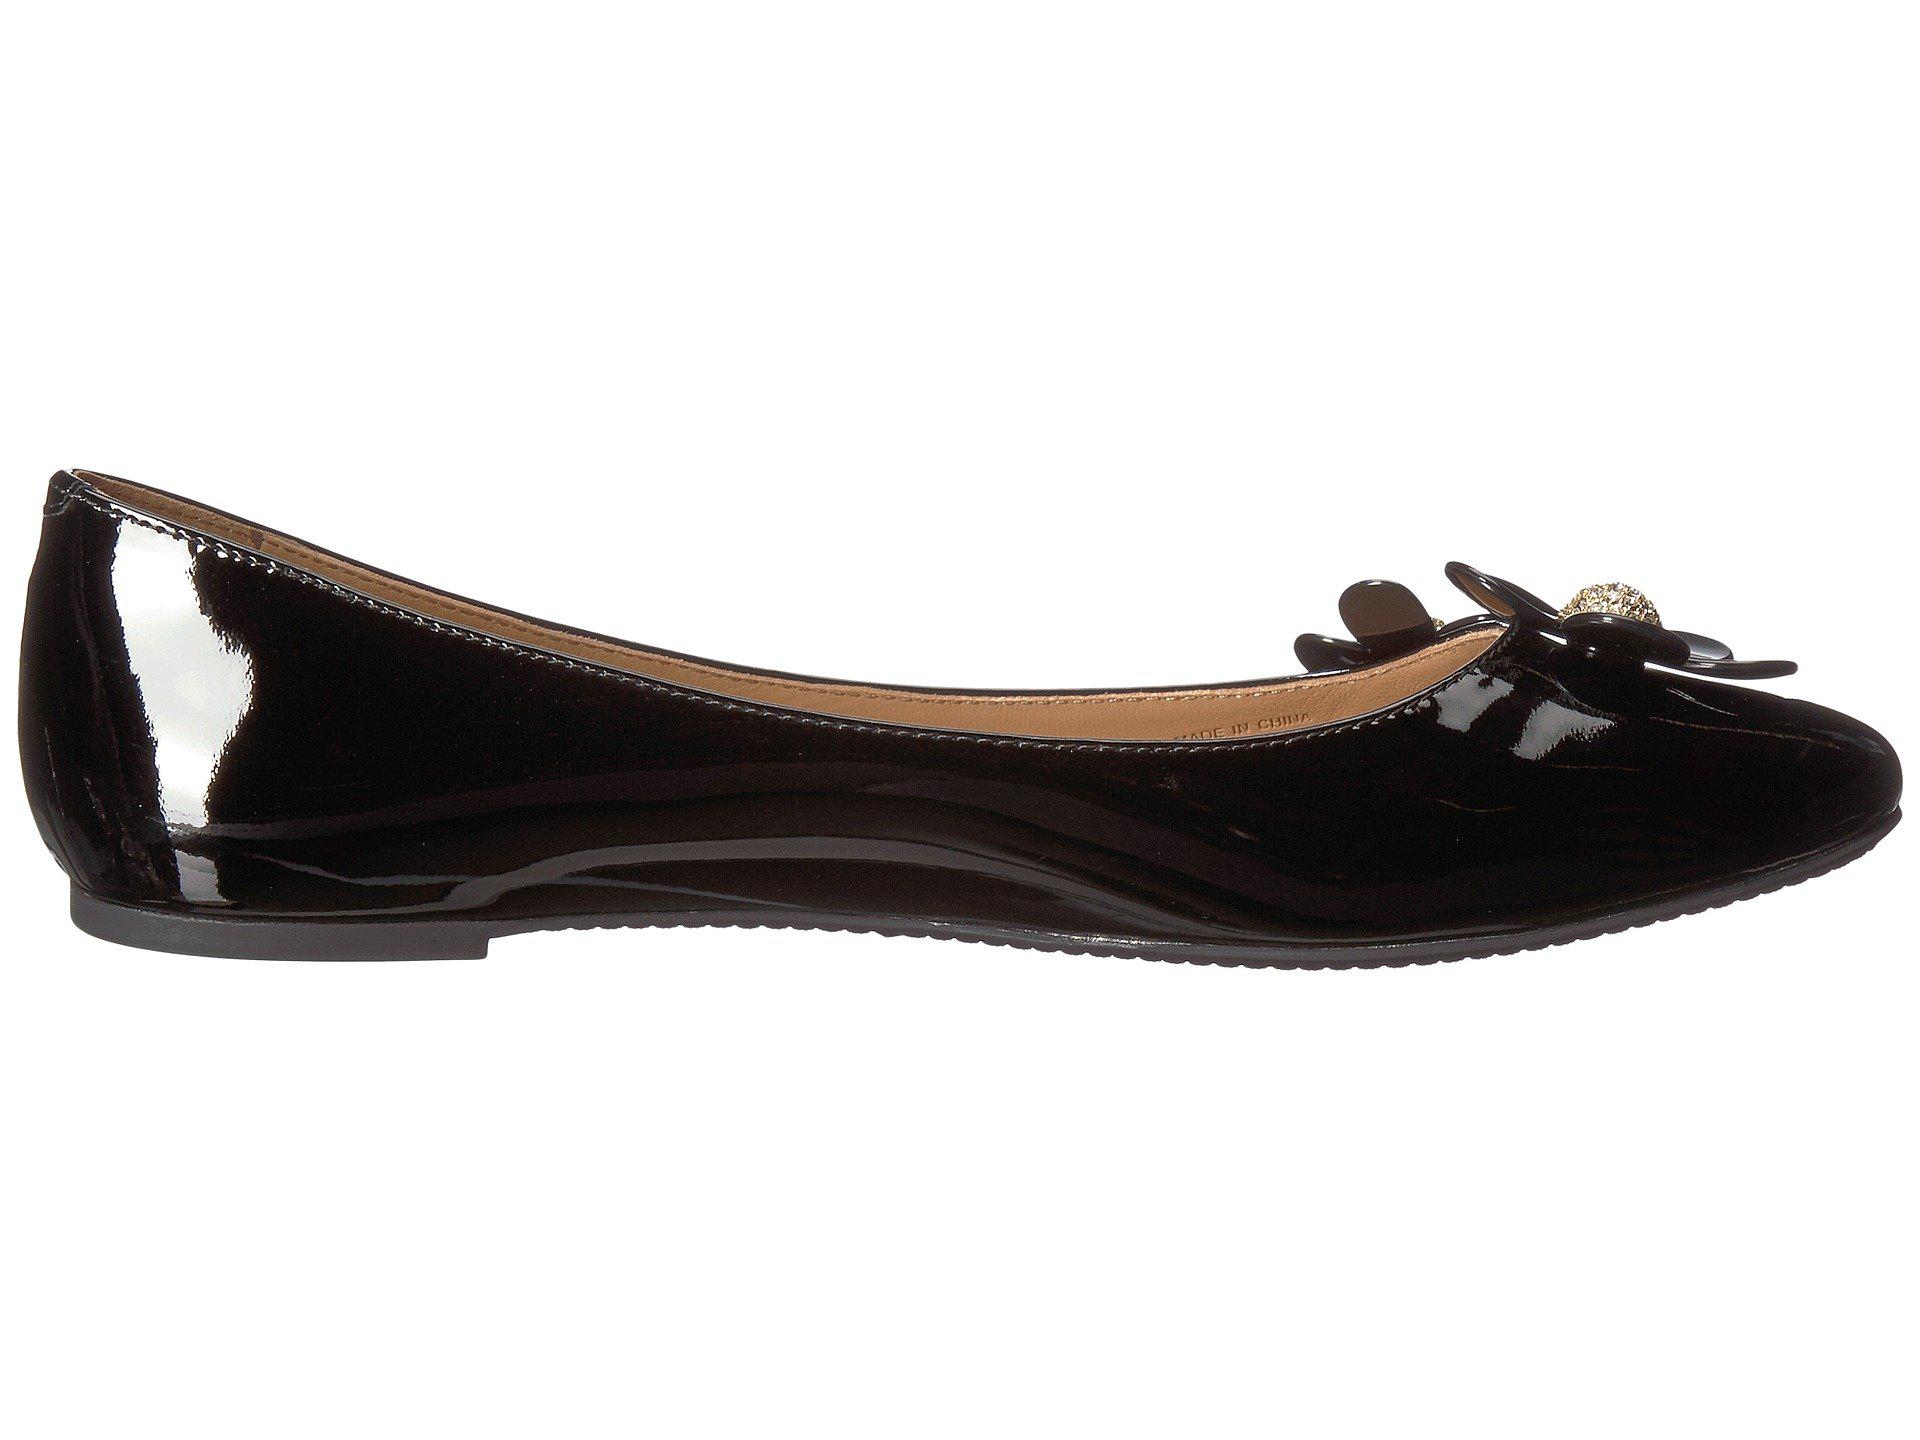 Marc Jacobs Leather Daisy Ballerina Flat in Black - Lyst